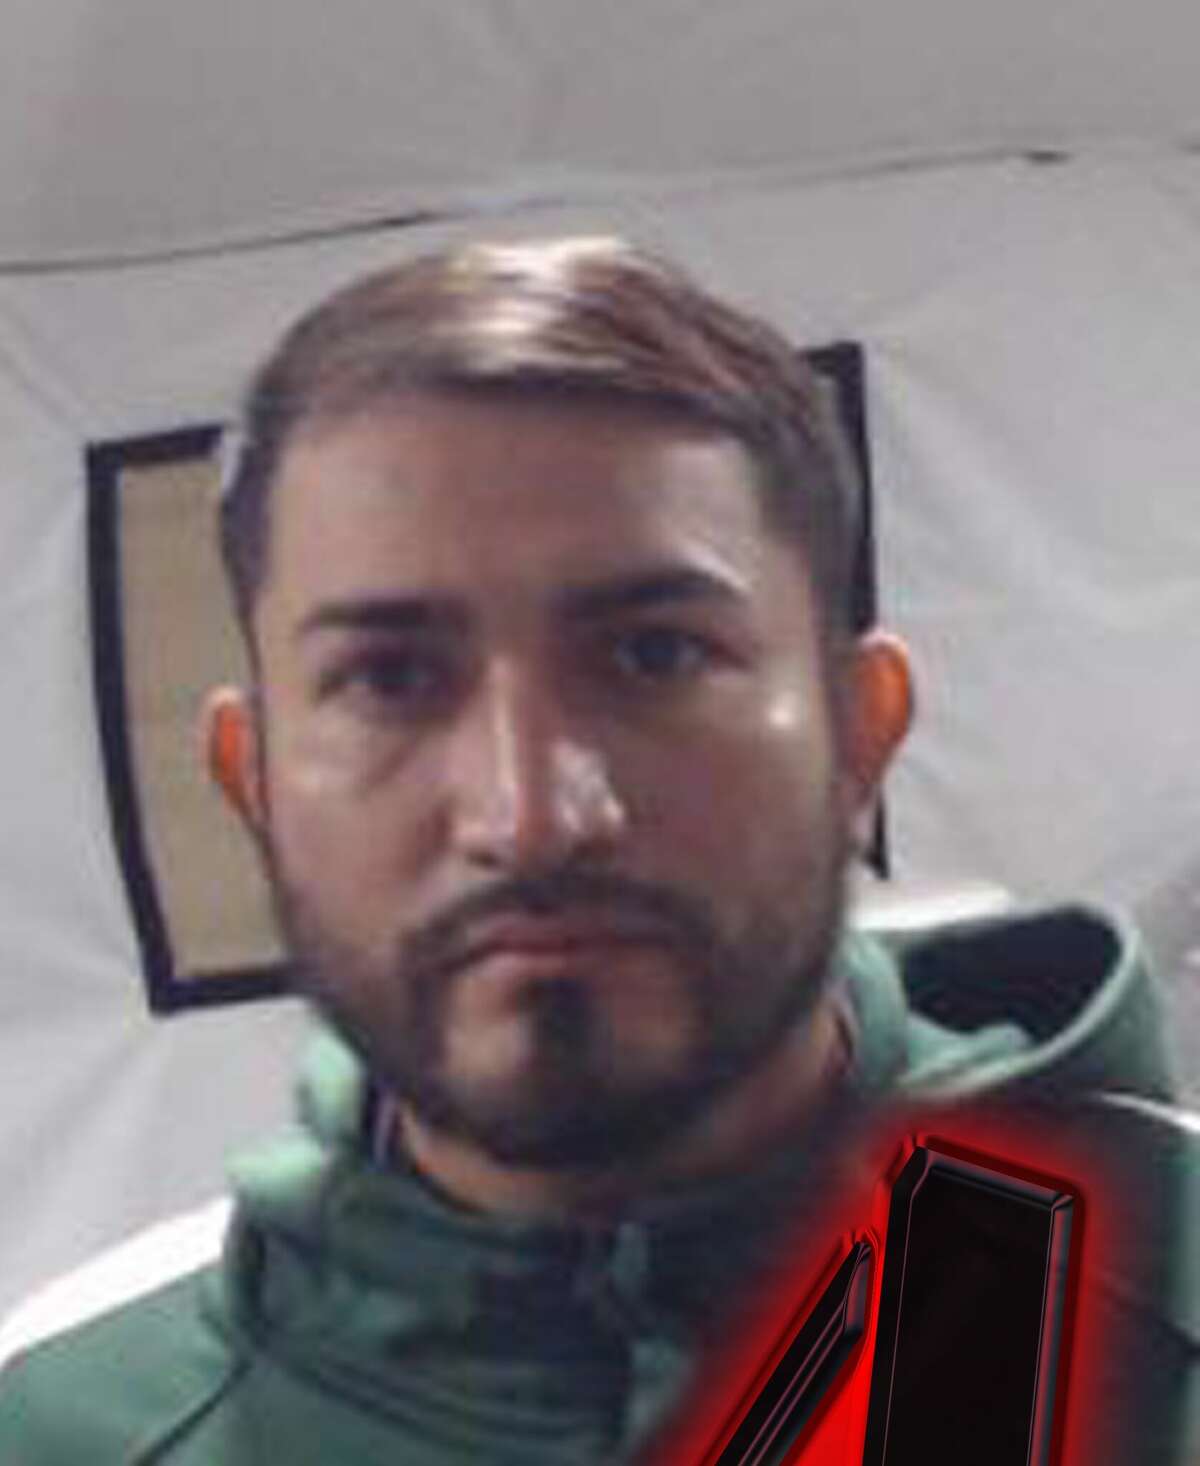 Jose Luis Alfaro-Cruz, a 37-year-old Mexican national, had a prior felony conviction for Lewd or Lascivious Acts with a Minor. He was caught trying to cross the border illegally by Laredo Sector Border Patrol agents on March 19, 2023.